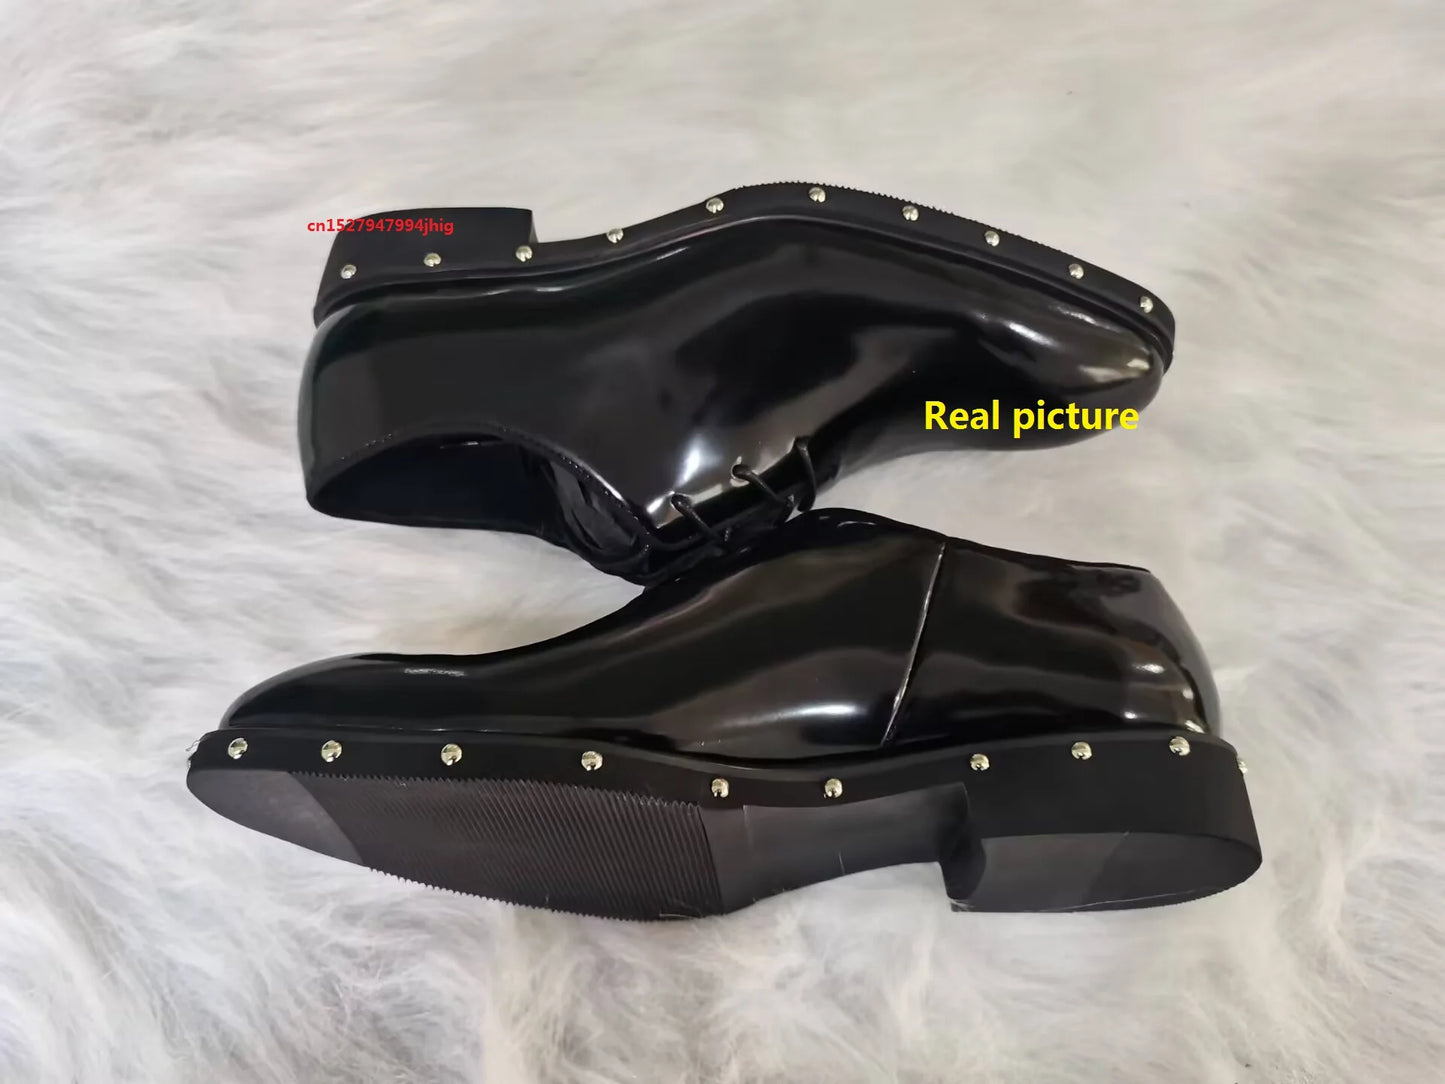 Handmade Genuine leather Black Wedding Dress Shoe Rivets Patent leather Formal Business Shoes Studded Man Flats Lace up  Hombre